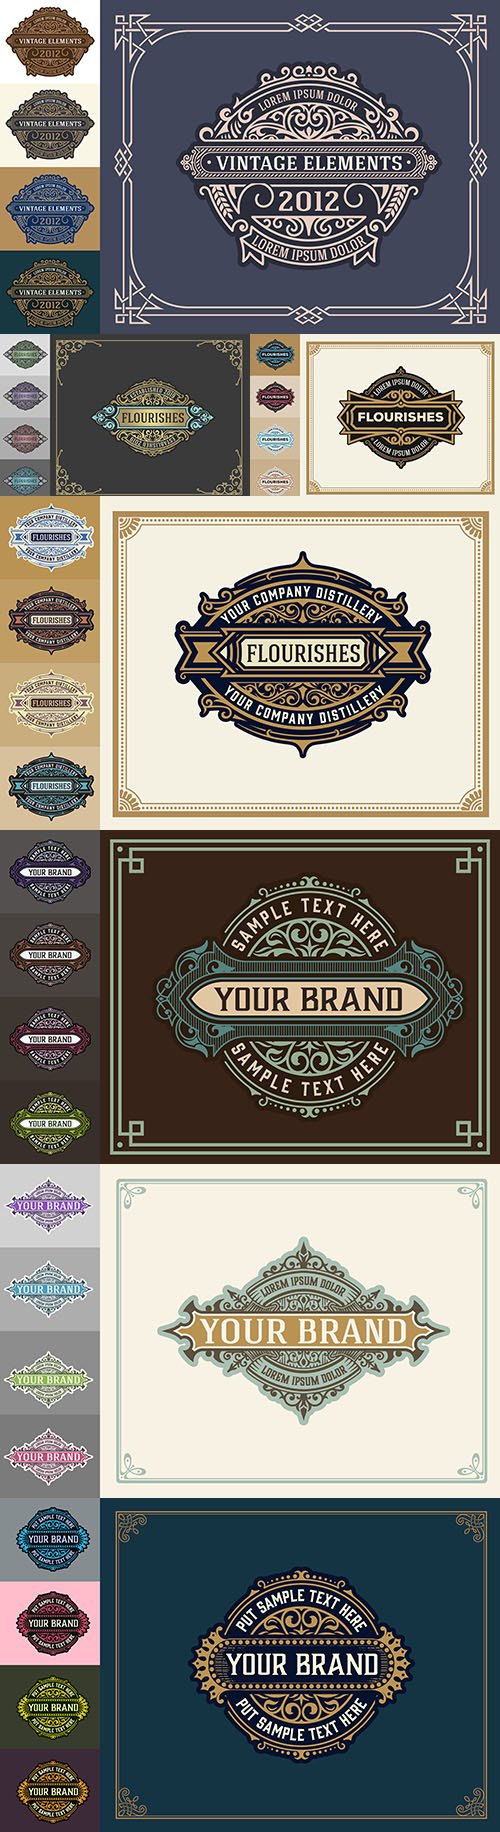 Luxury vintage logo template with decorative floral ornaments